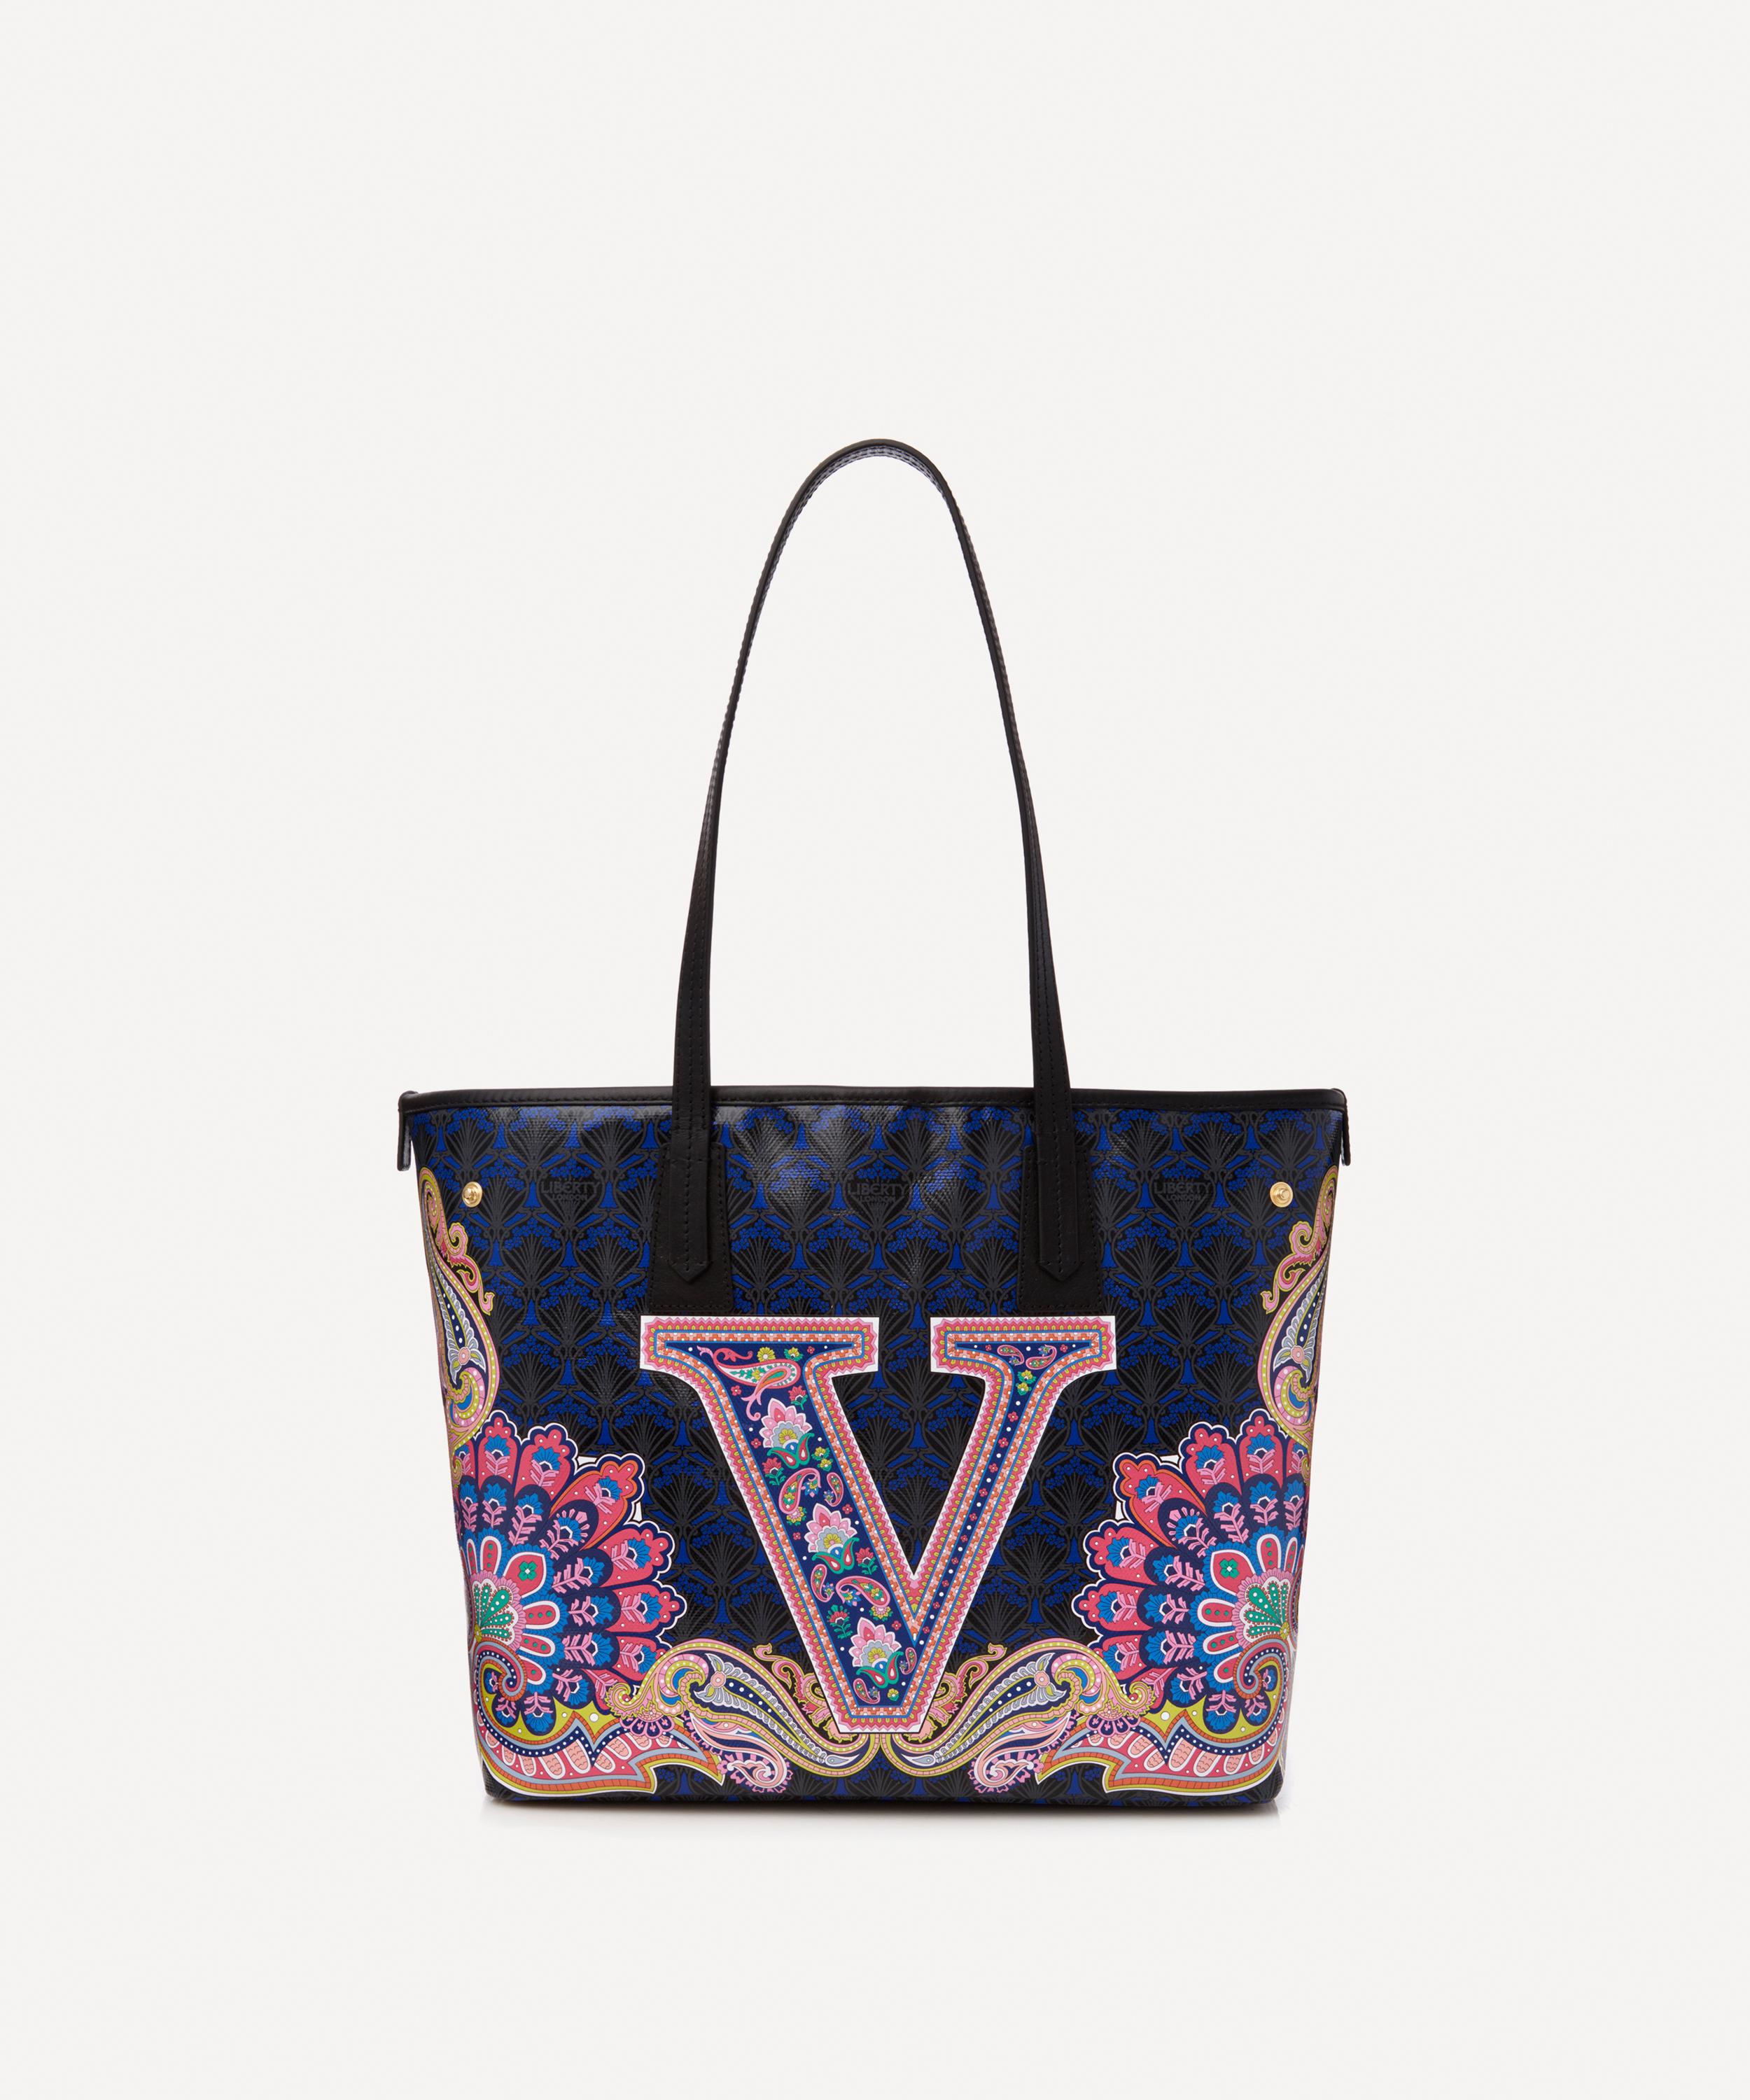 Liberty London Little Marlborough Tote Bag In V Print In Wentworth Paisley